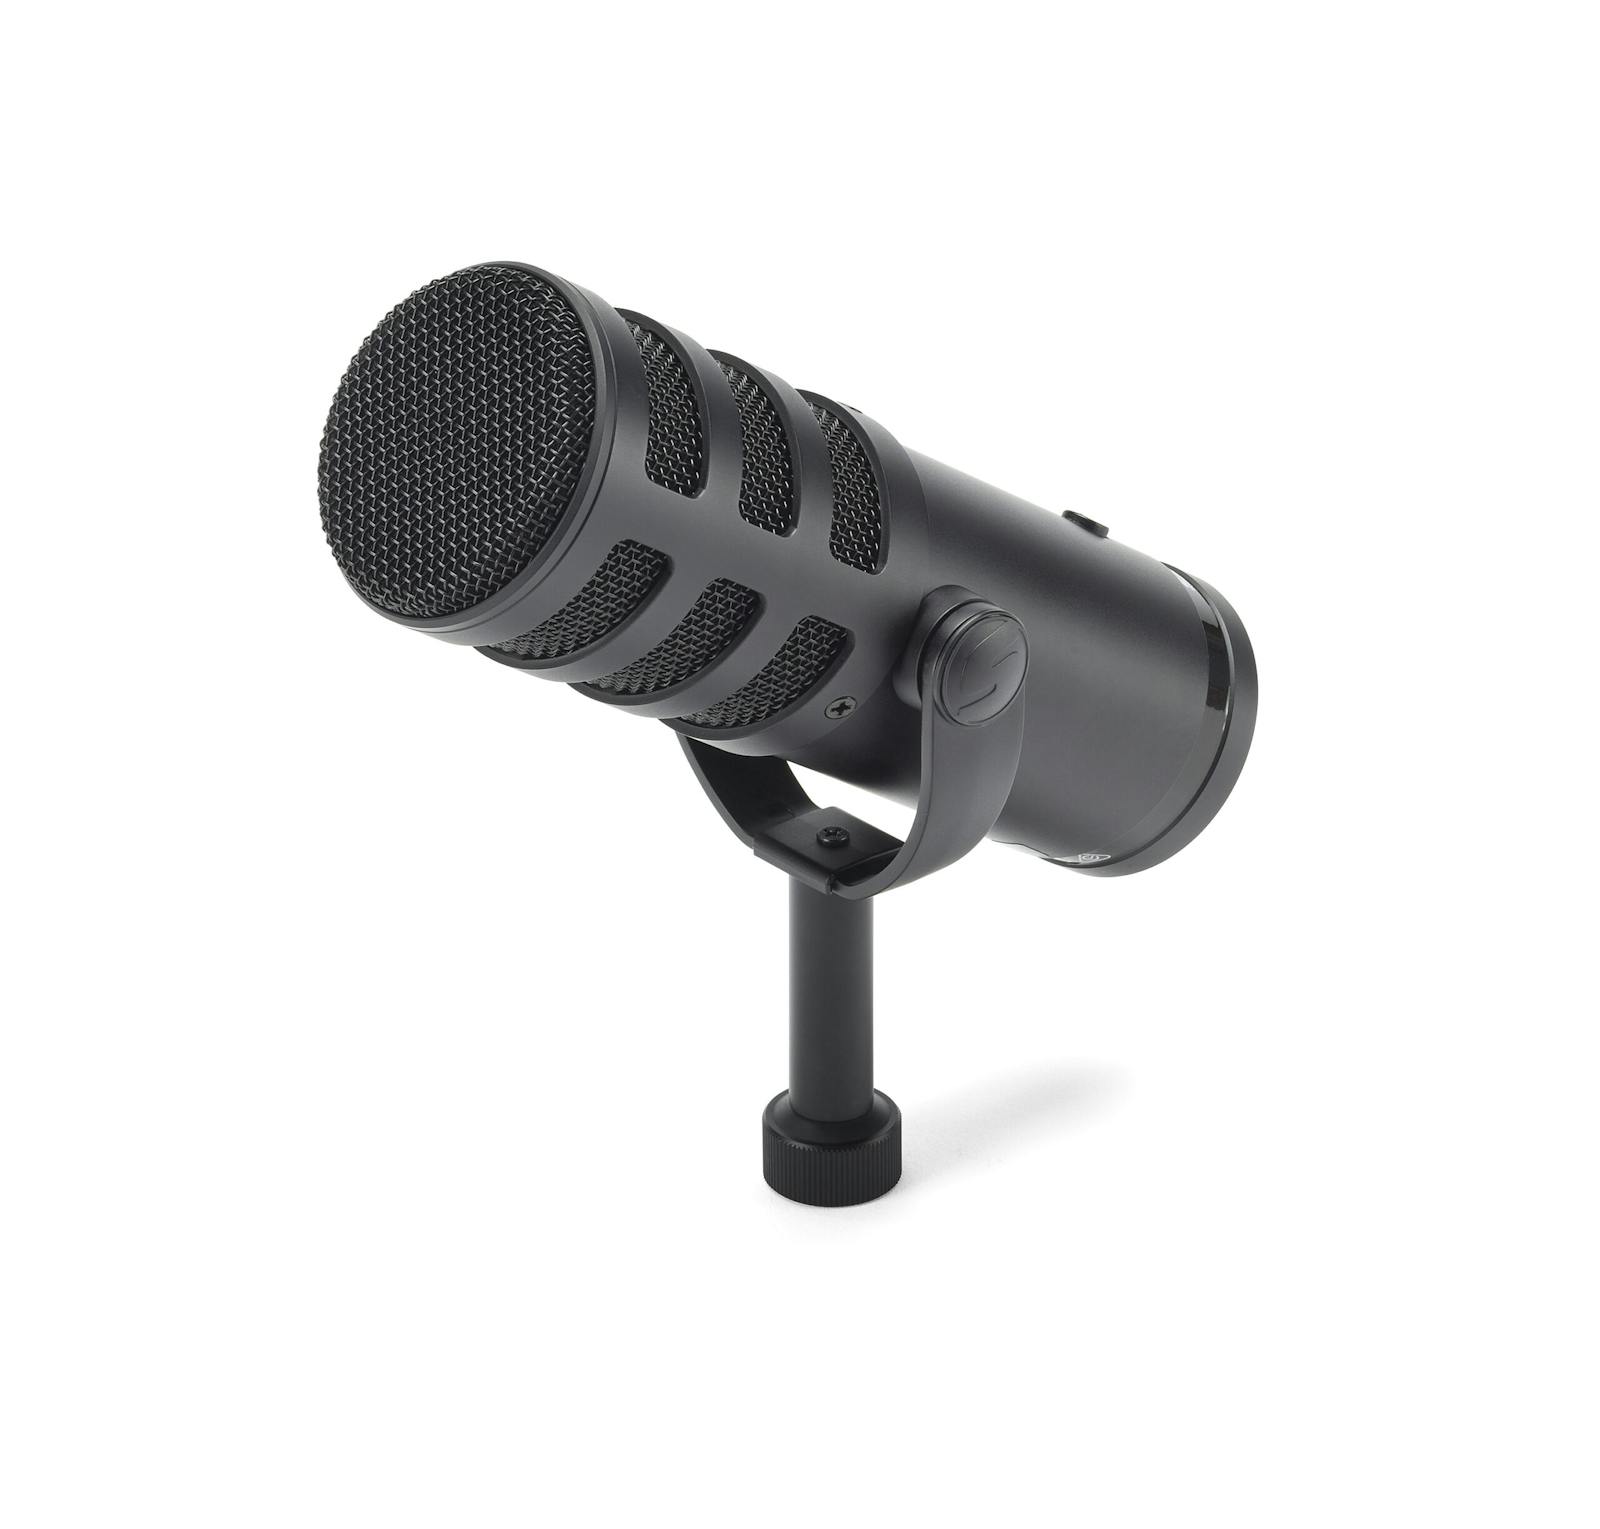 Best USB Microphone For Rapping